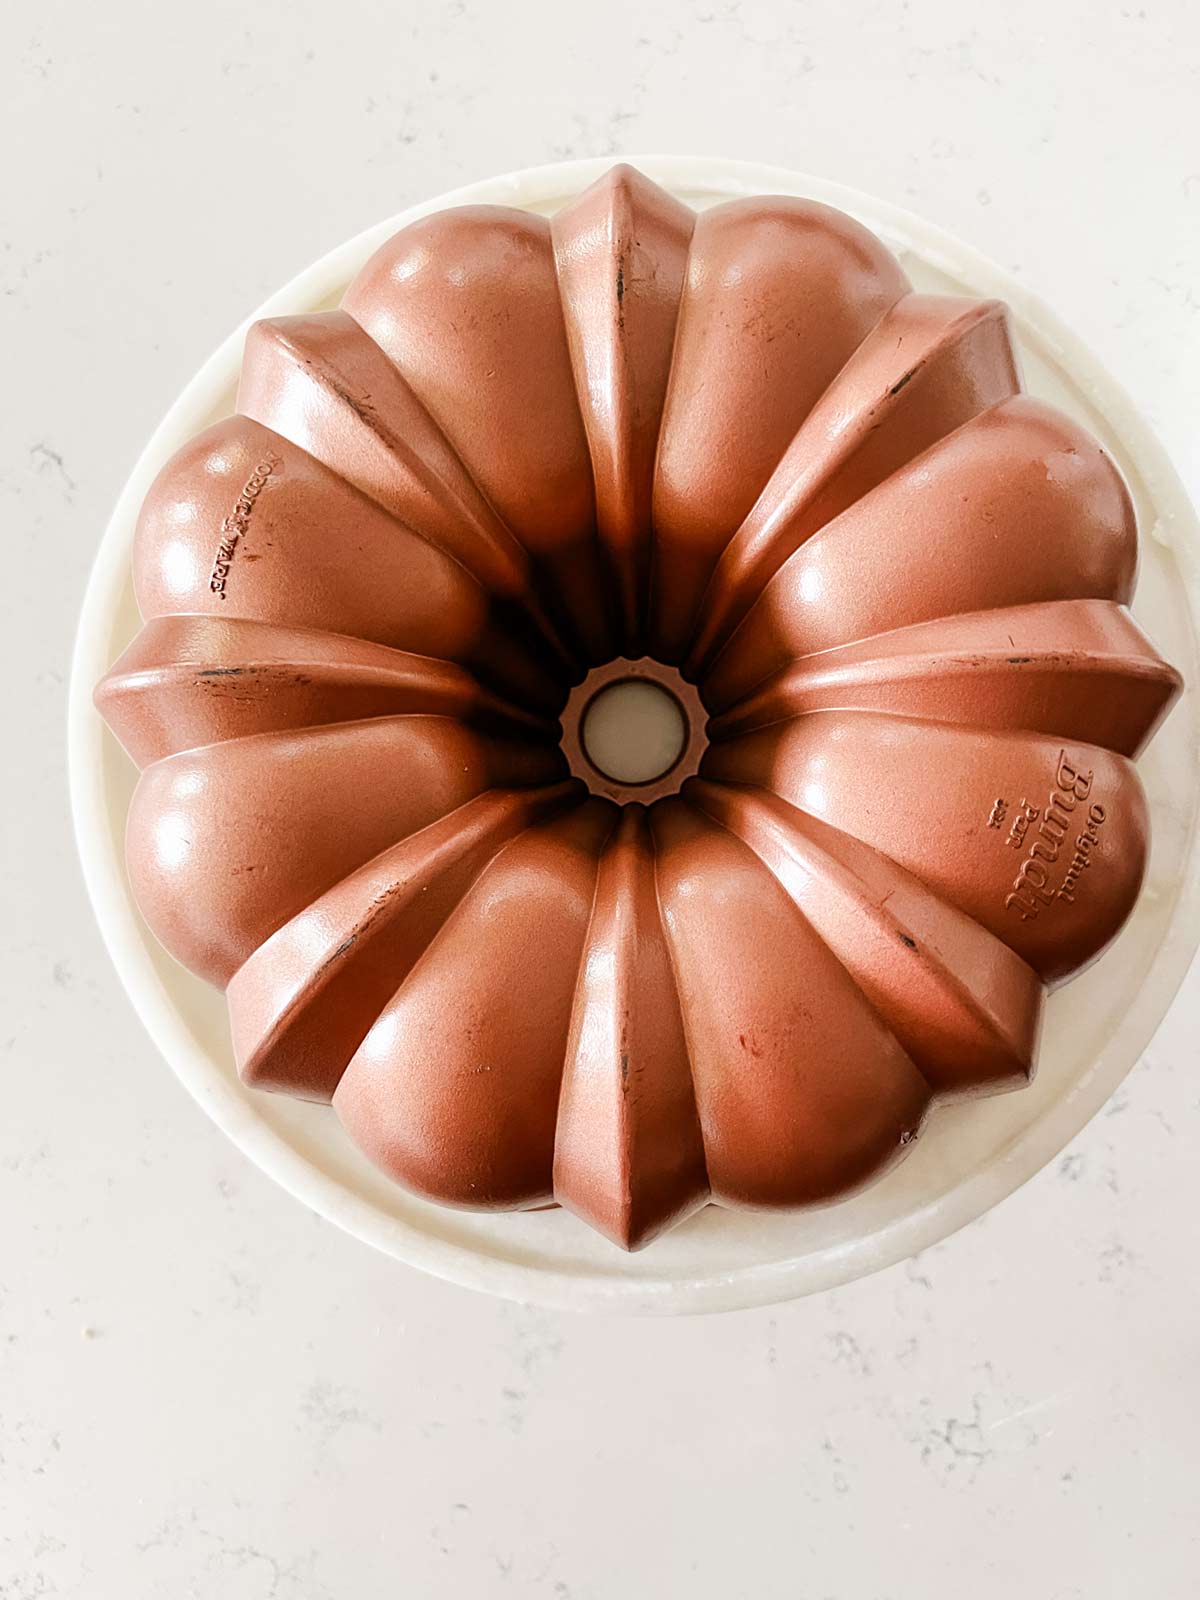 An inverted Bundt pan on a cake stand.